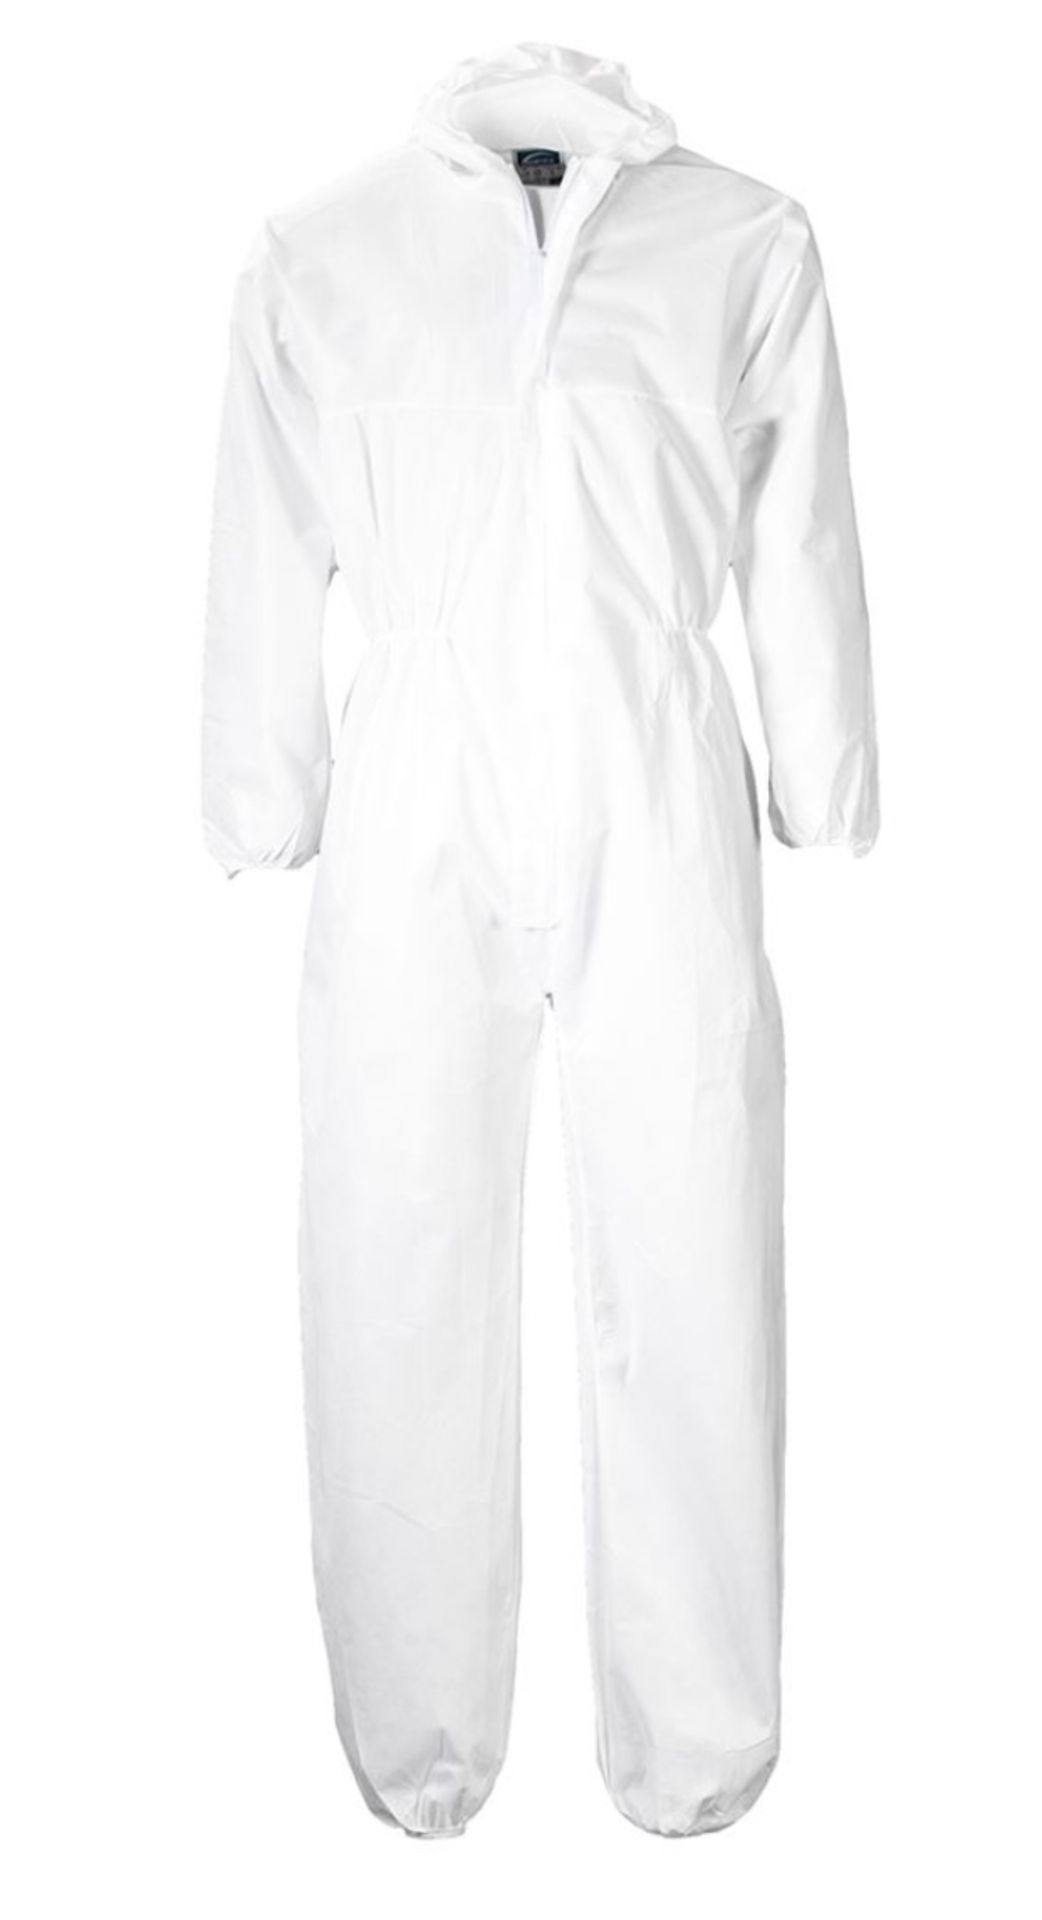 4000X PROTECTIVE COVERALL MEDIUM FOR SPRAY PAINTERS BUILDERS CHEMICAL